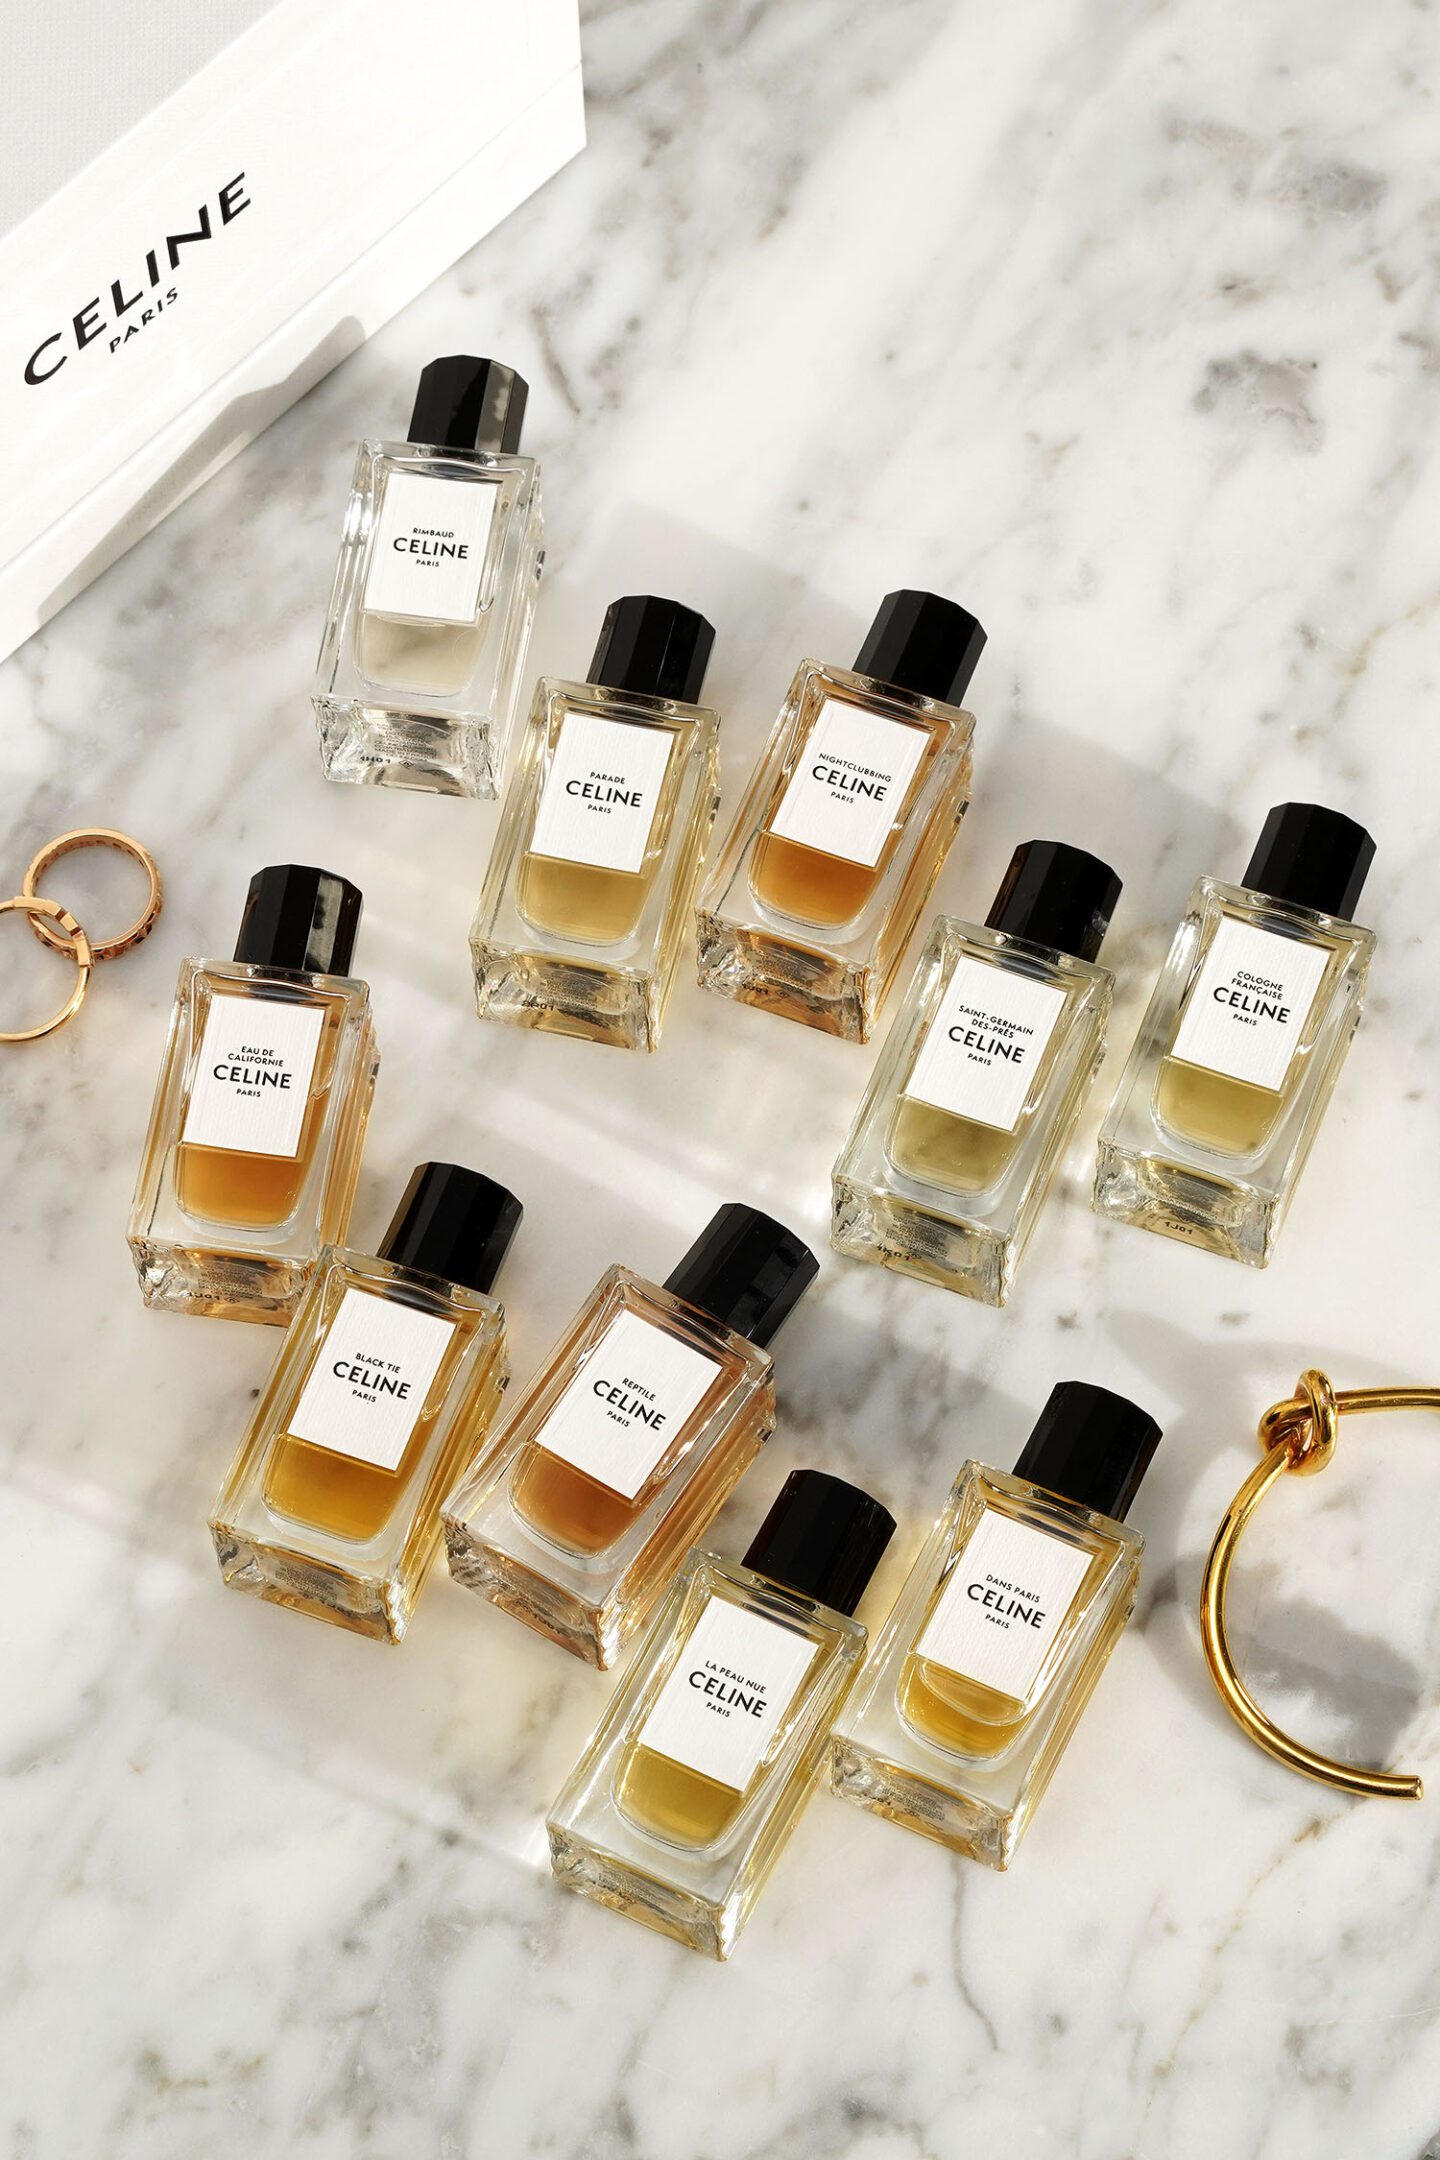 Celine Fragrance Collection Review